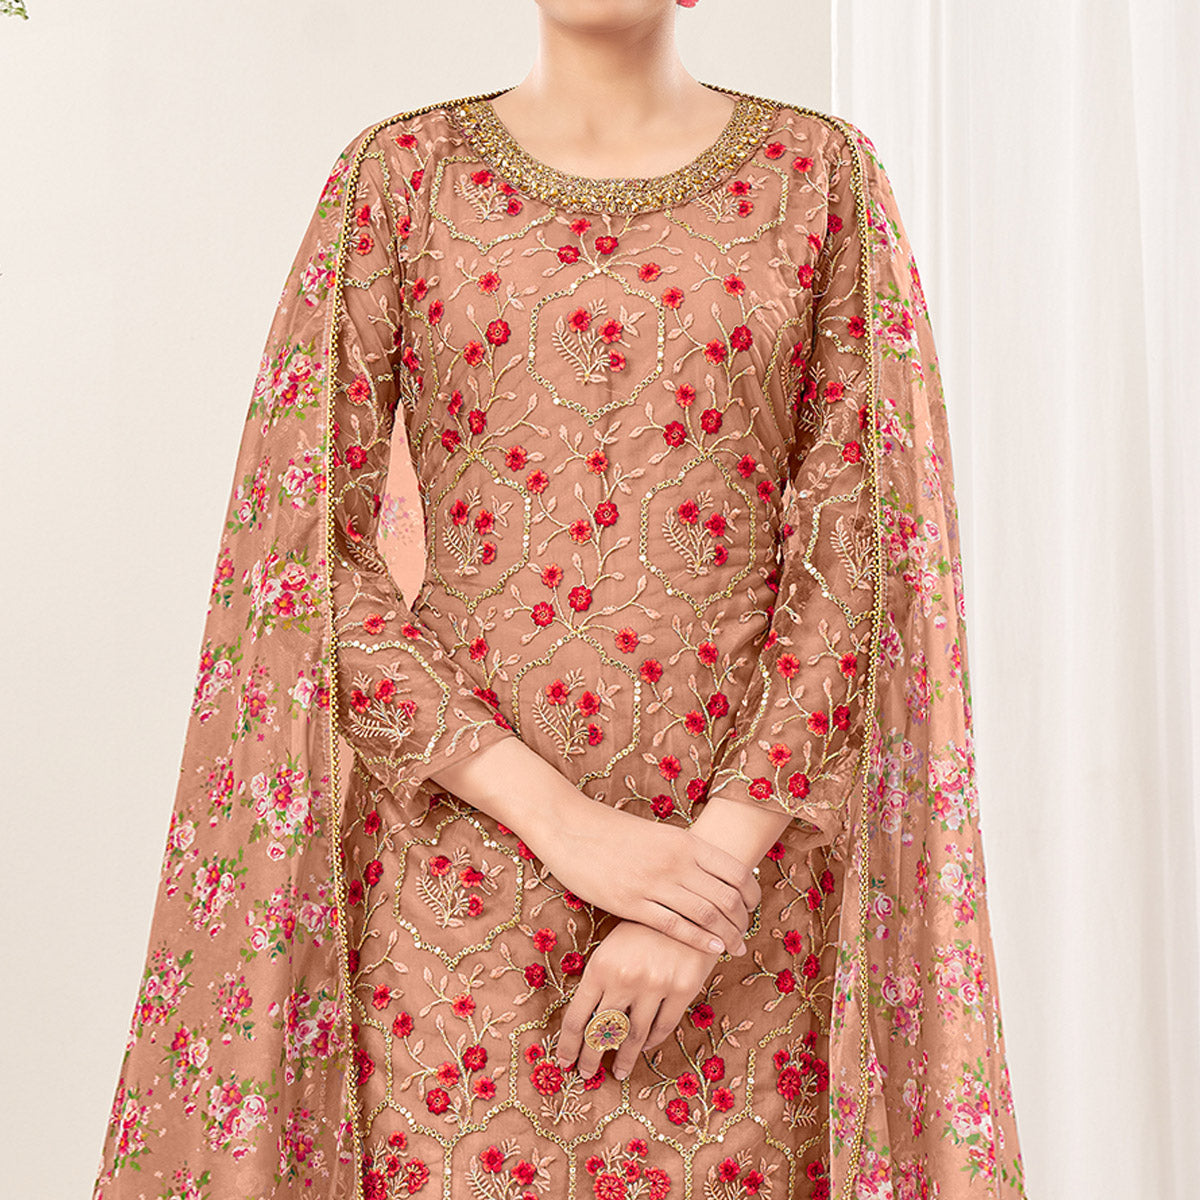 Peach Floral Sequins Embroidered Net Patiala Suit